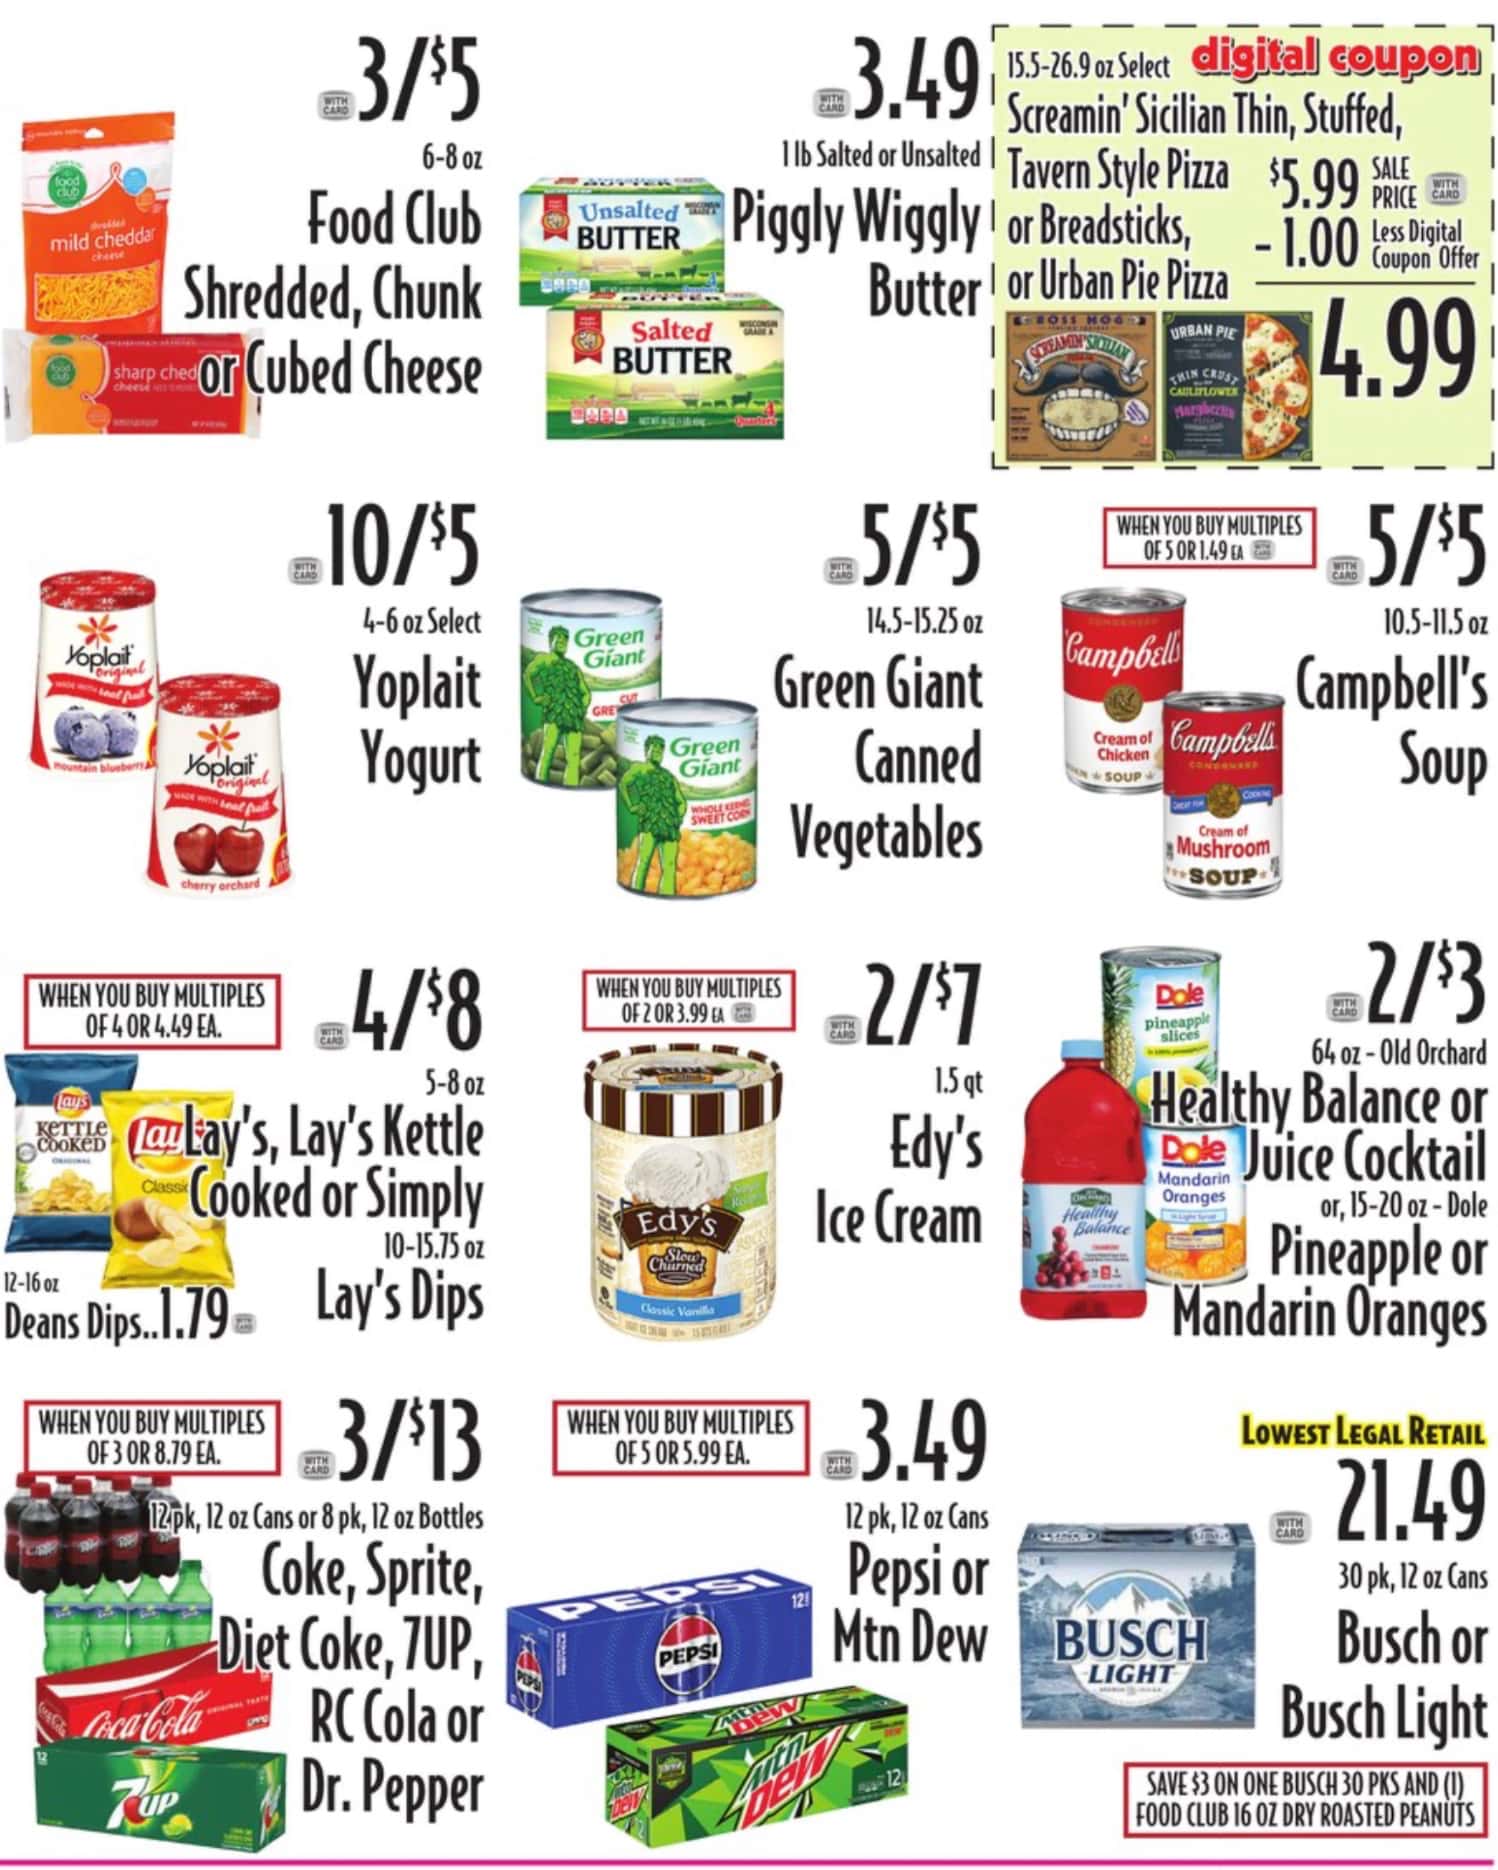 PigglyWiggly_weekly_ad_032724_02